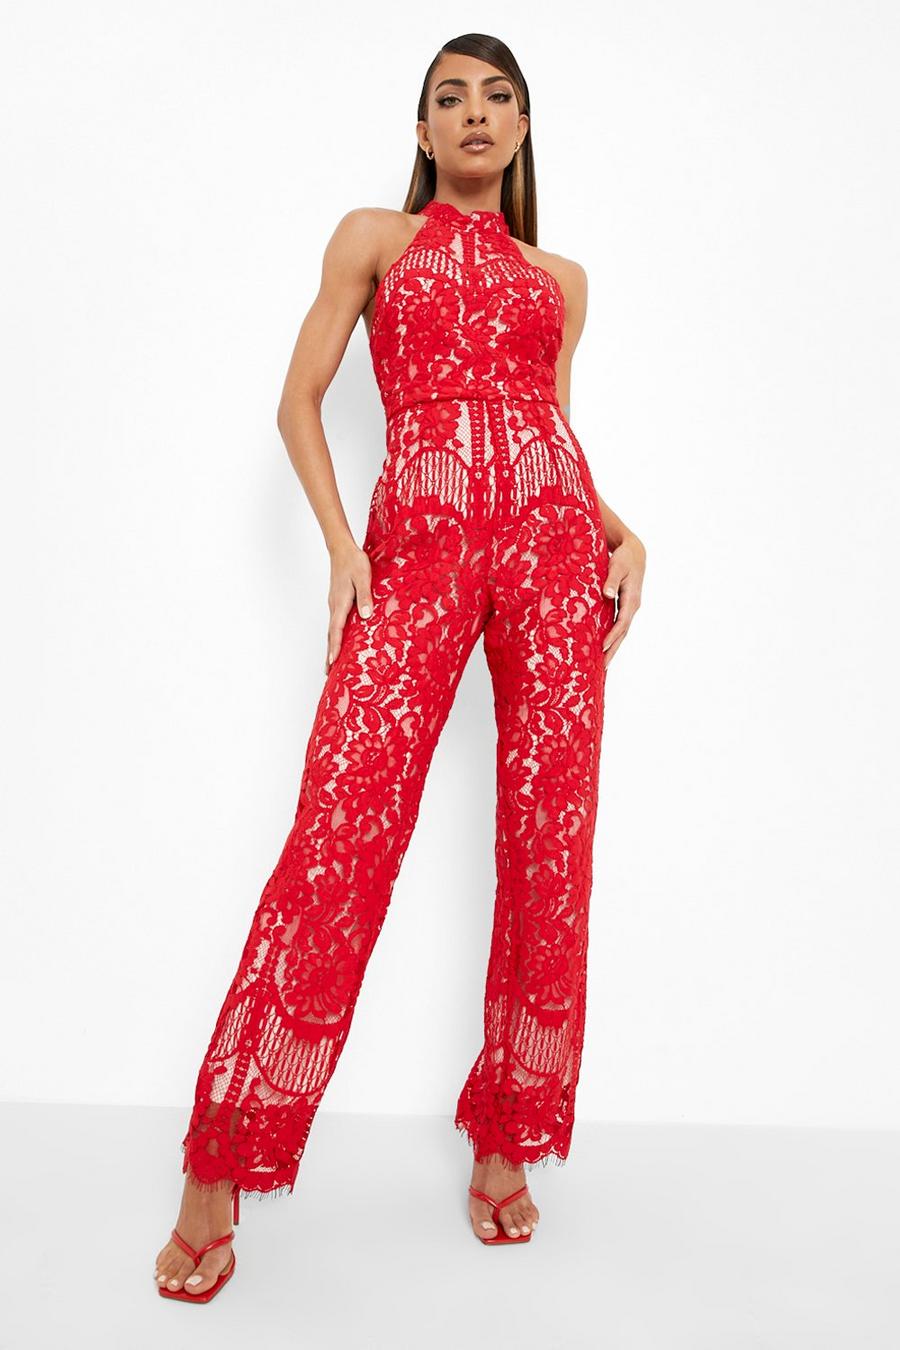 Red Lace Halter Neck Sleeveless Jumpsuit